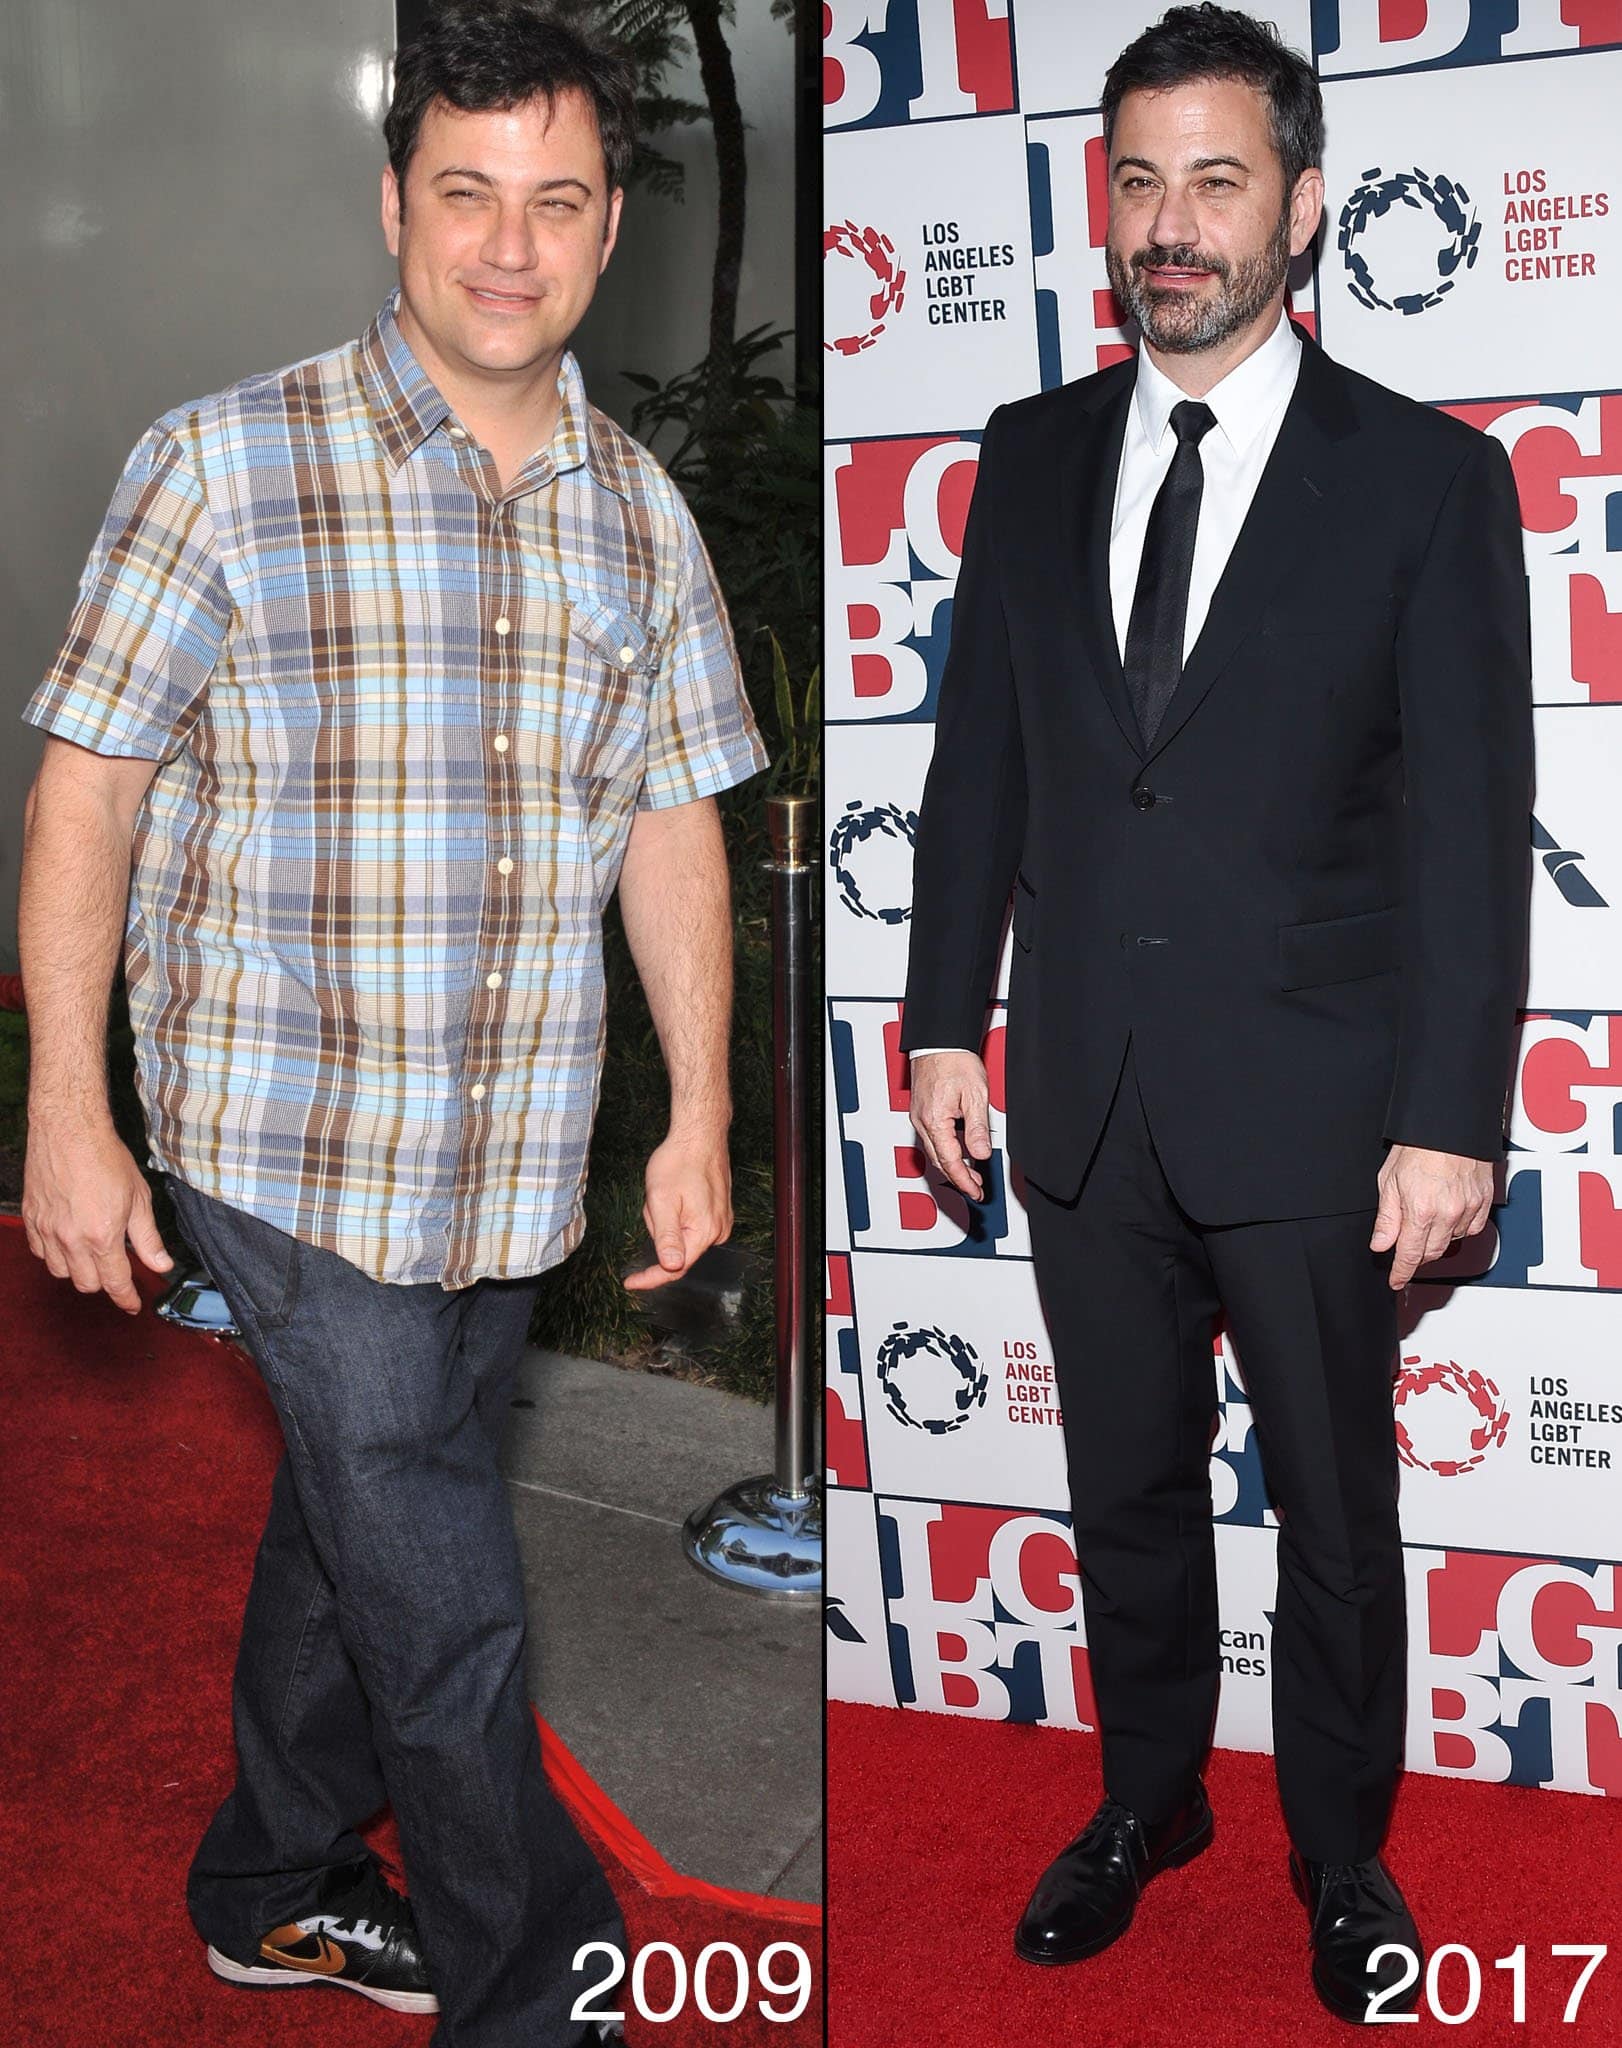 Jimmy Kimmel has been following the 5:2 diet, which is a type of intermittent fasting